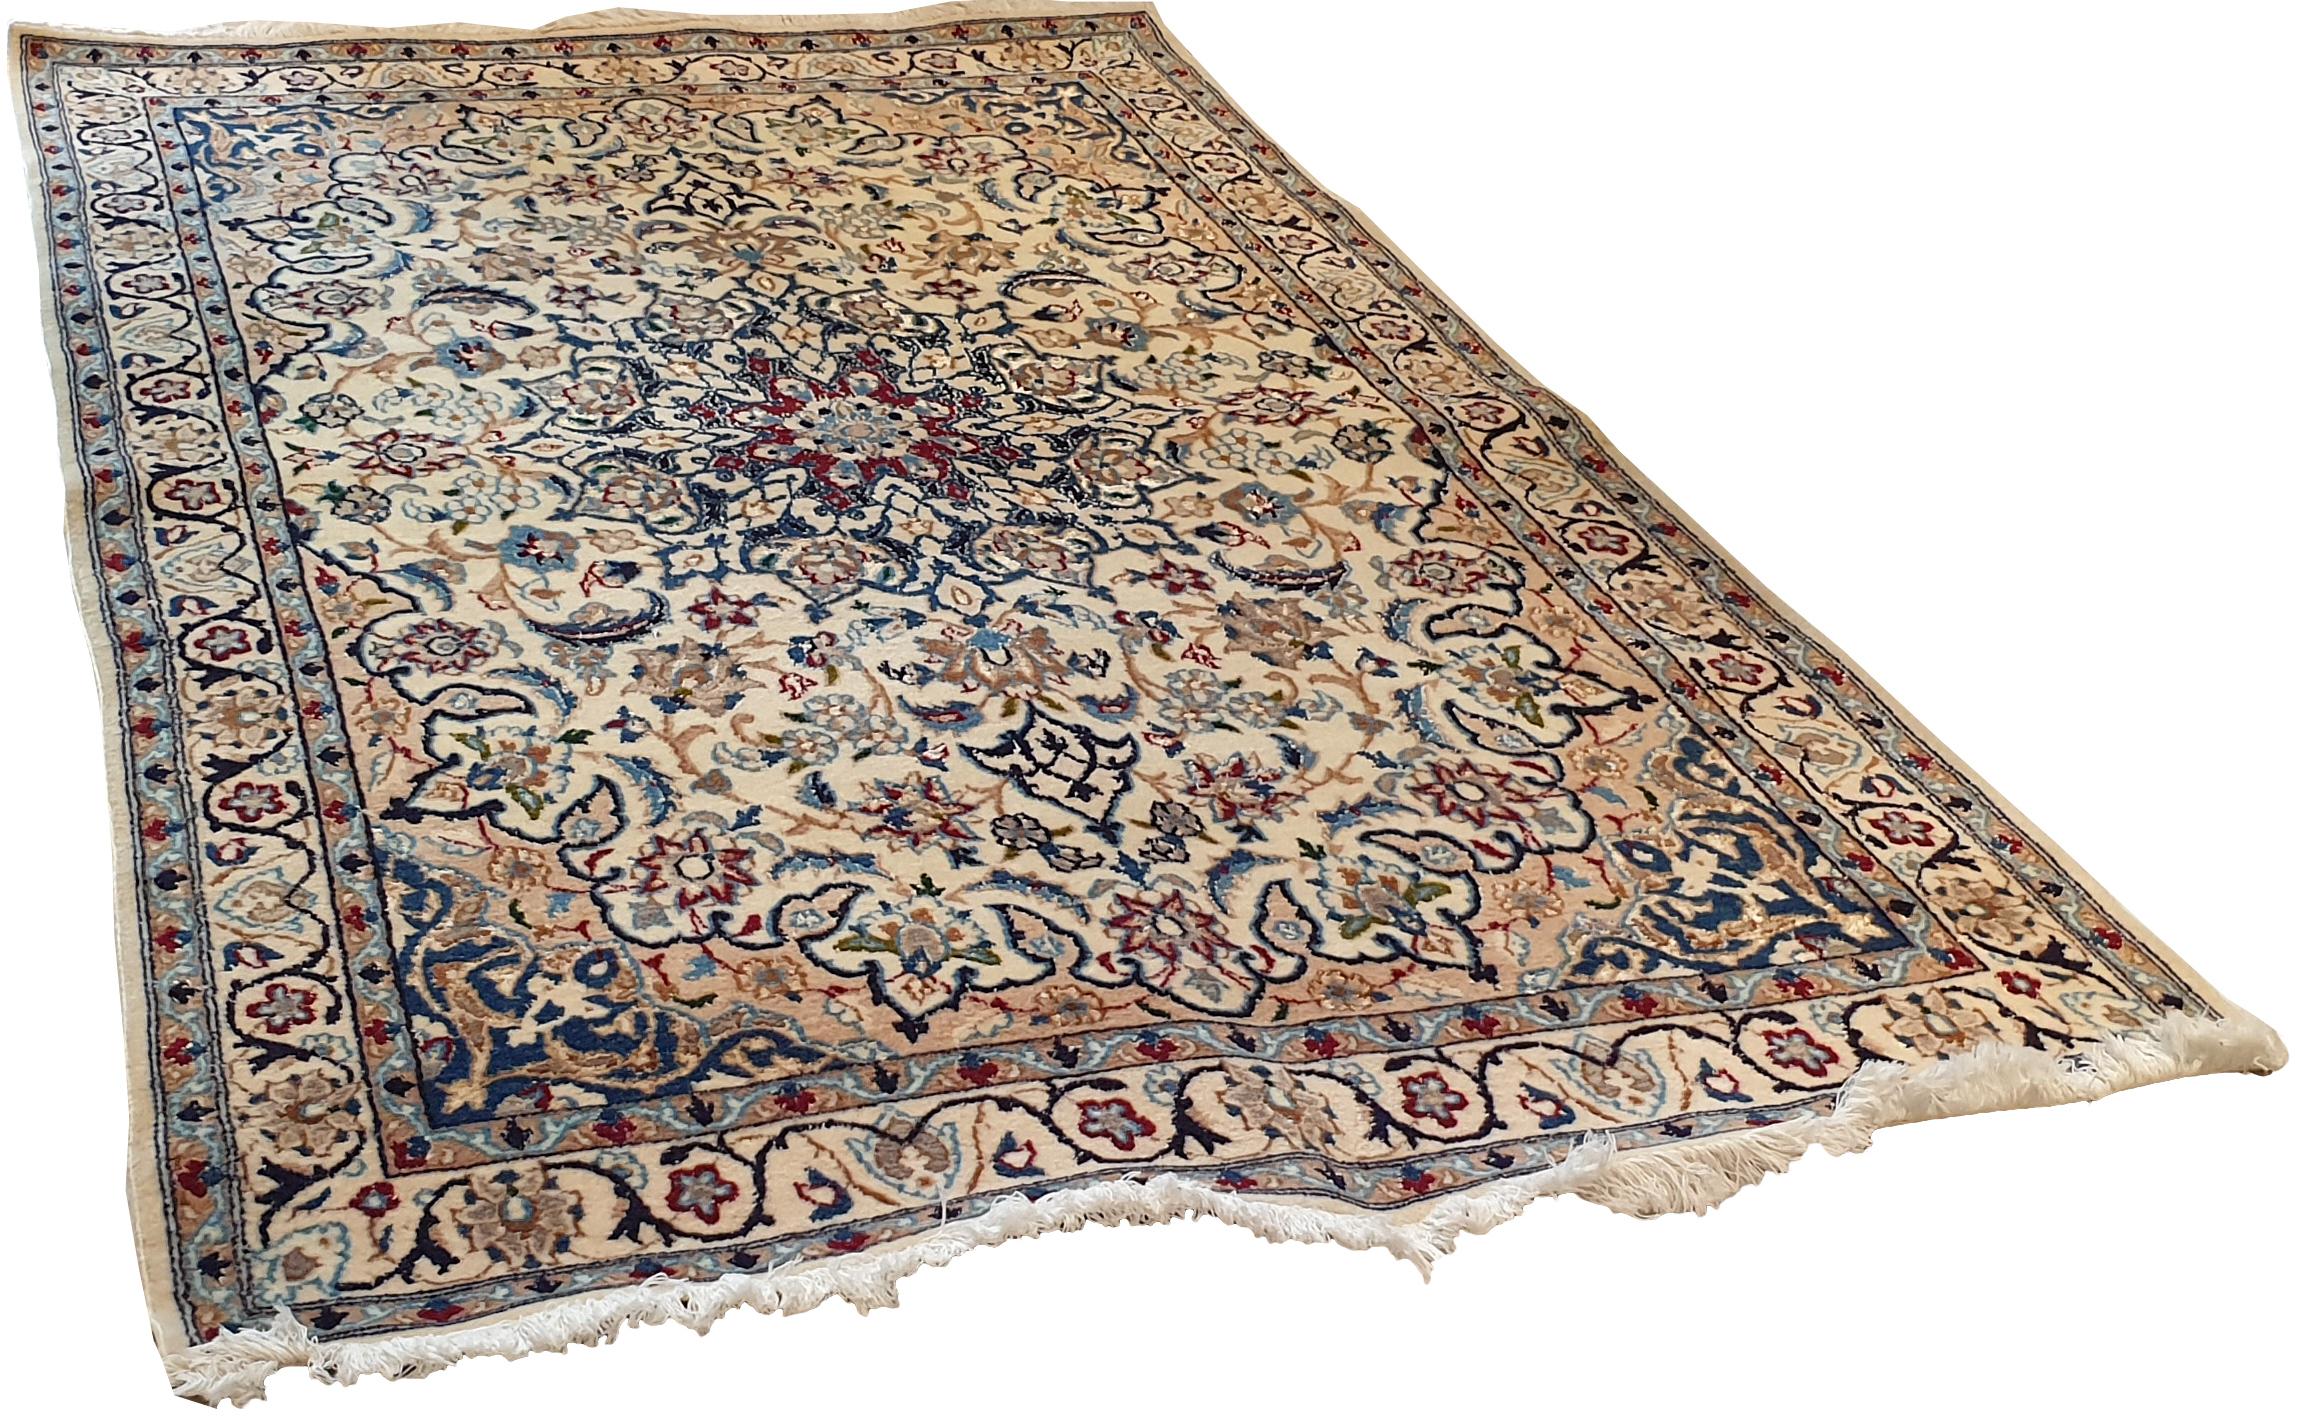 838 - Beautiful 20th century carpet with a pretty floral pattern and a finely hand-knotted central medallion with wool and silk velvet on a cotton foundation.